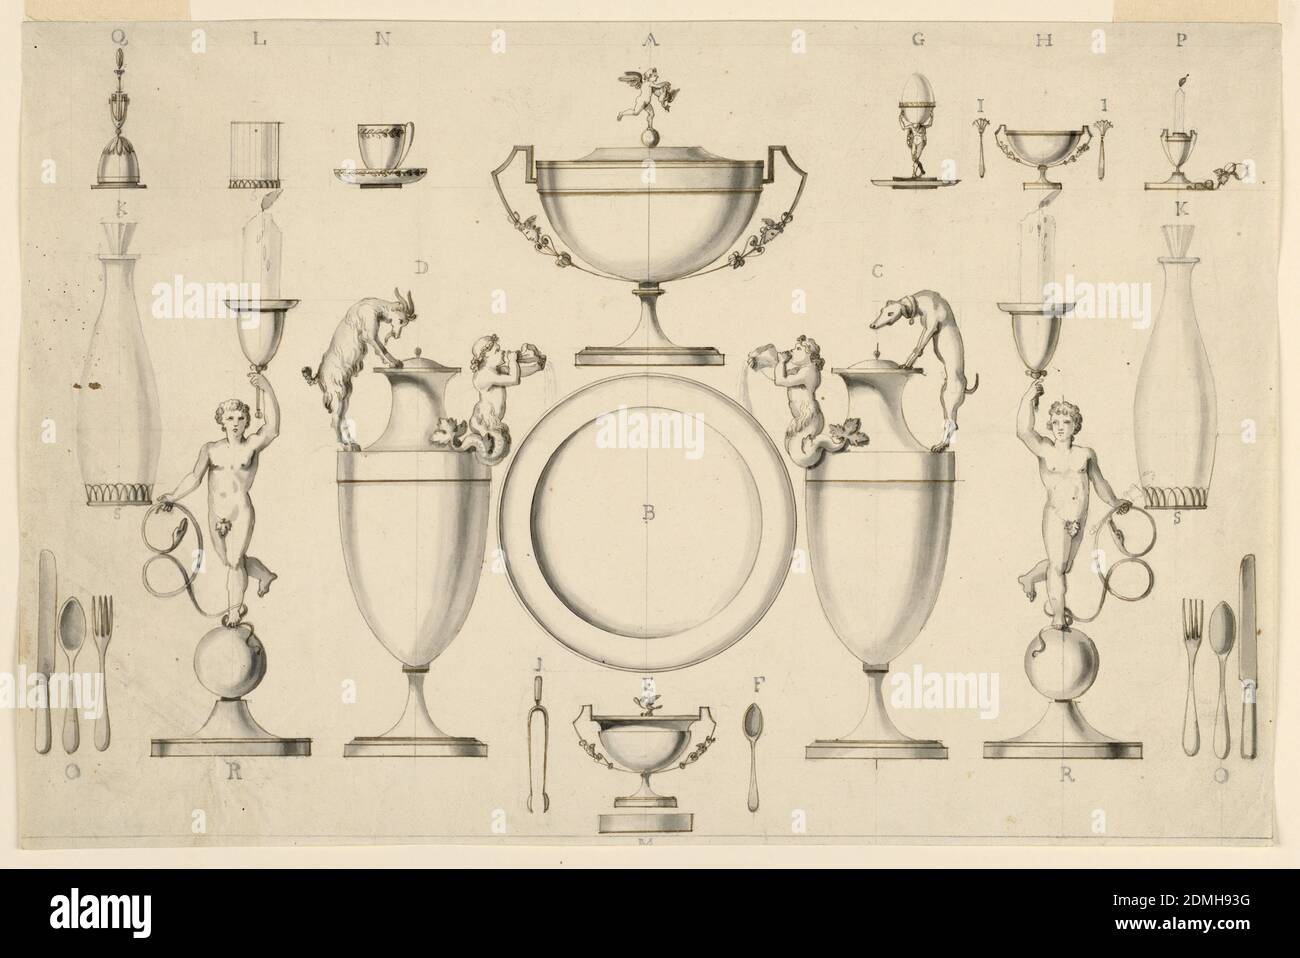 Design for a Set of Silver Tableware, Pietro Belli, Italian, 1780–1828, Pen and brown ink, brush and gray wash over graphite on off-white laid paper, A hand bell. the lower part of the handle is shaped like a lyre. Marked, as all the letters, in pencil: 'Q.' A glass in a lower frame, 'L.' A cup shown sidewise; laurel staffs are the decoration; 'N.' A tureen topped by a putto with a bird in a sphere. The handles consist of angular bands, Medusae, plant motifs; 'A.' An egg cup consisting of a bowl carried by Atlas; 'G.' A sugar spoon; 'I.' A sugar bowl; the handles are like those of the tureen Stock Photo